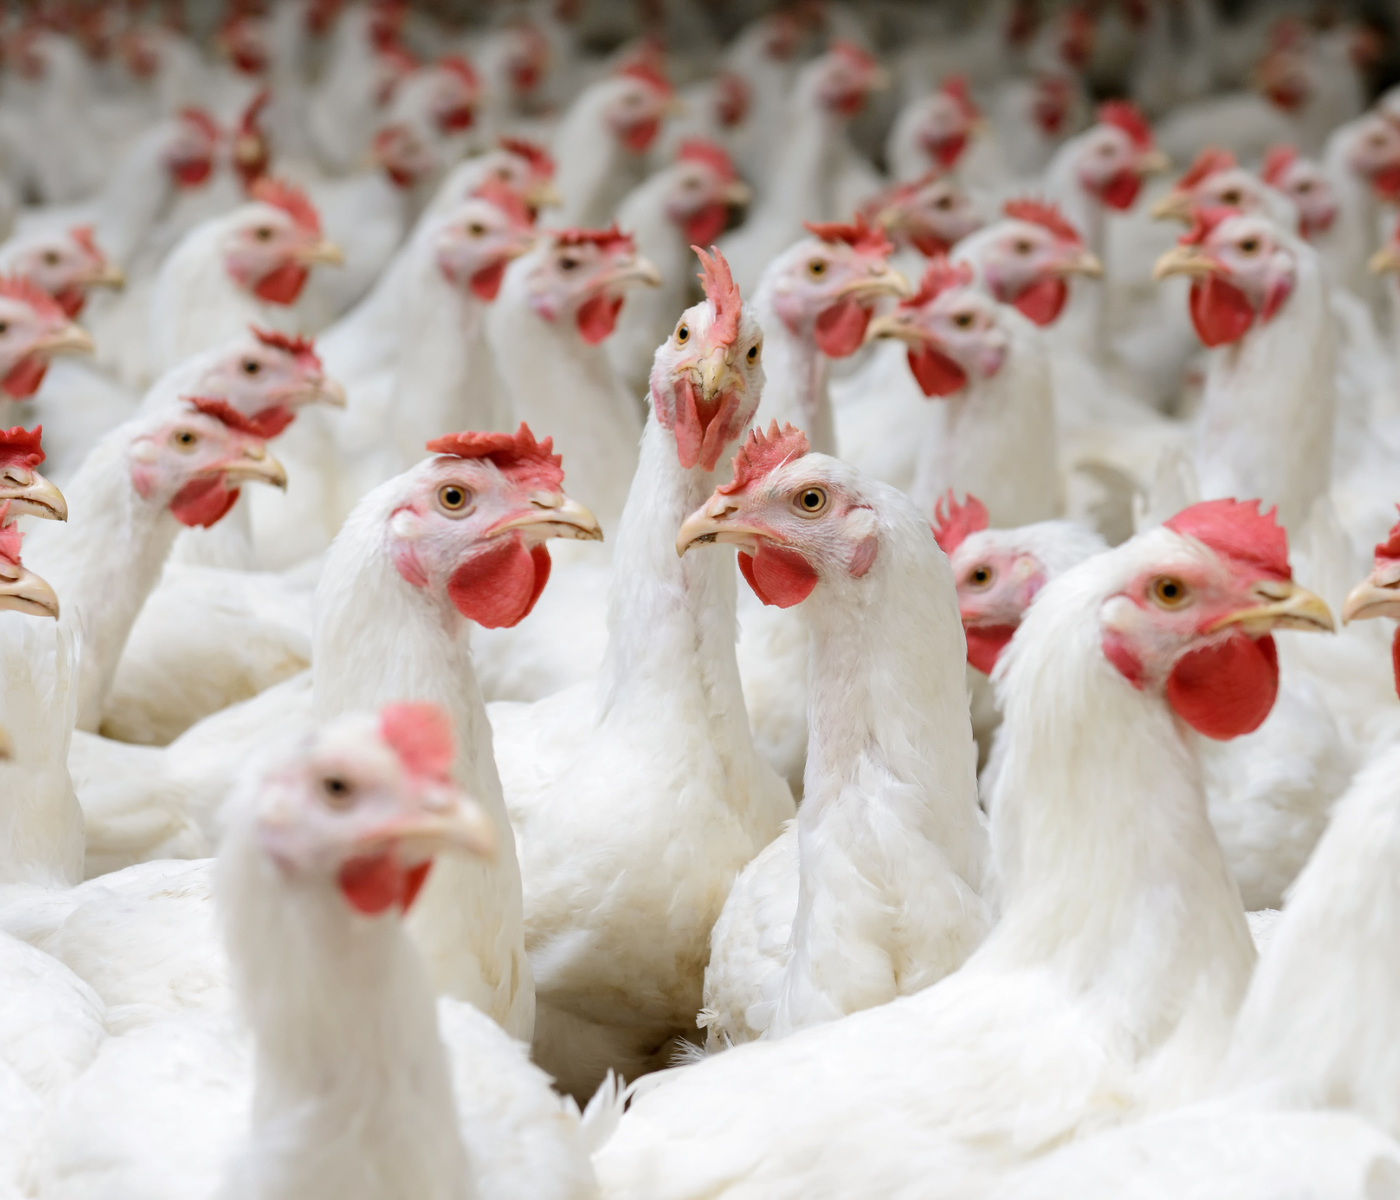 Indonesia looks to export chickens to shortage-hit Singapore